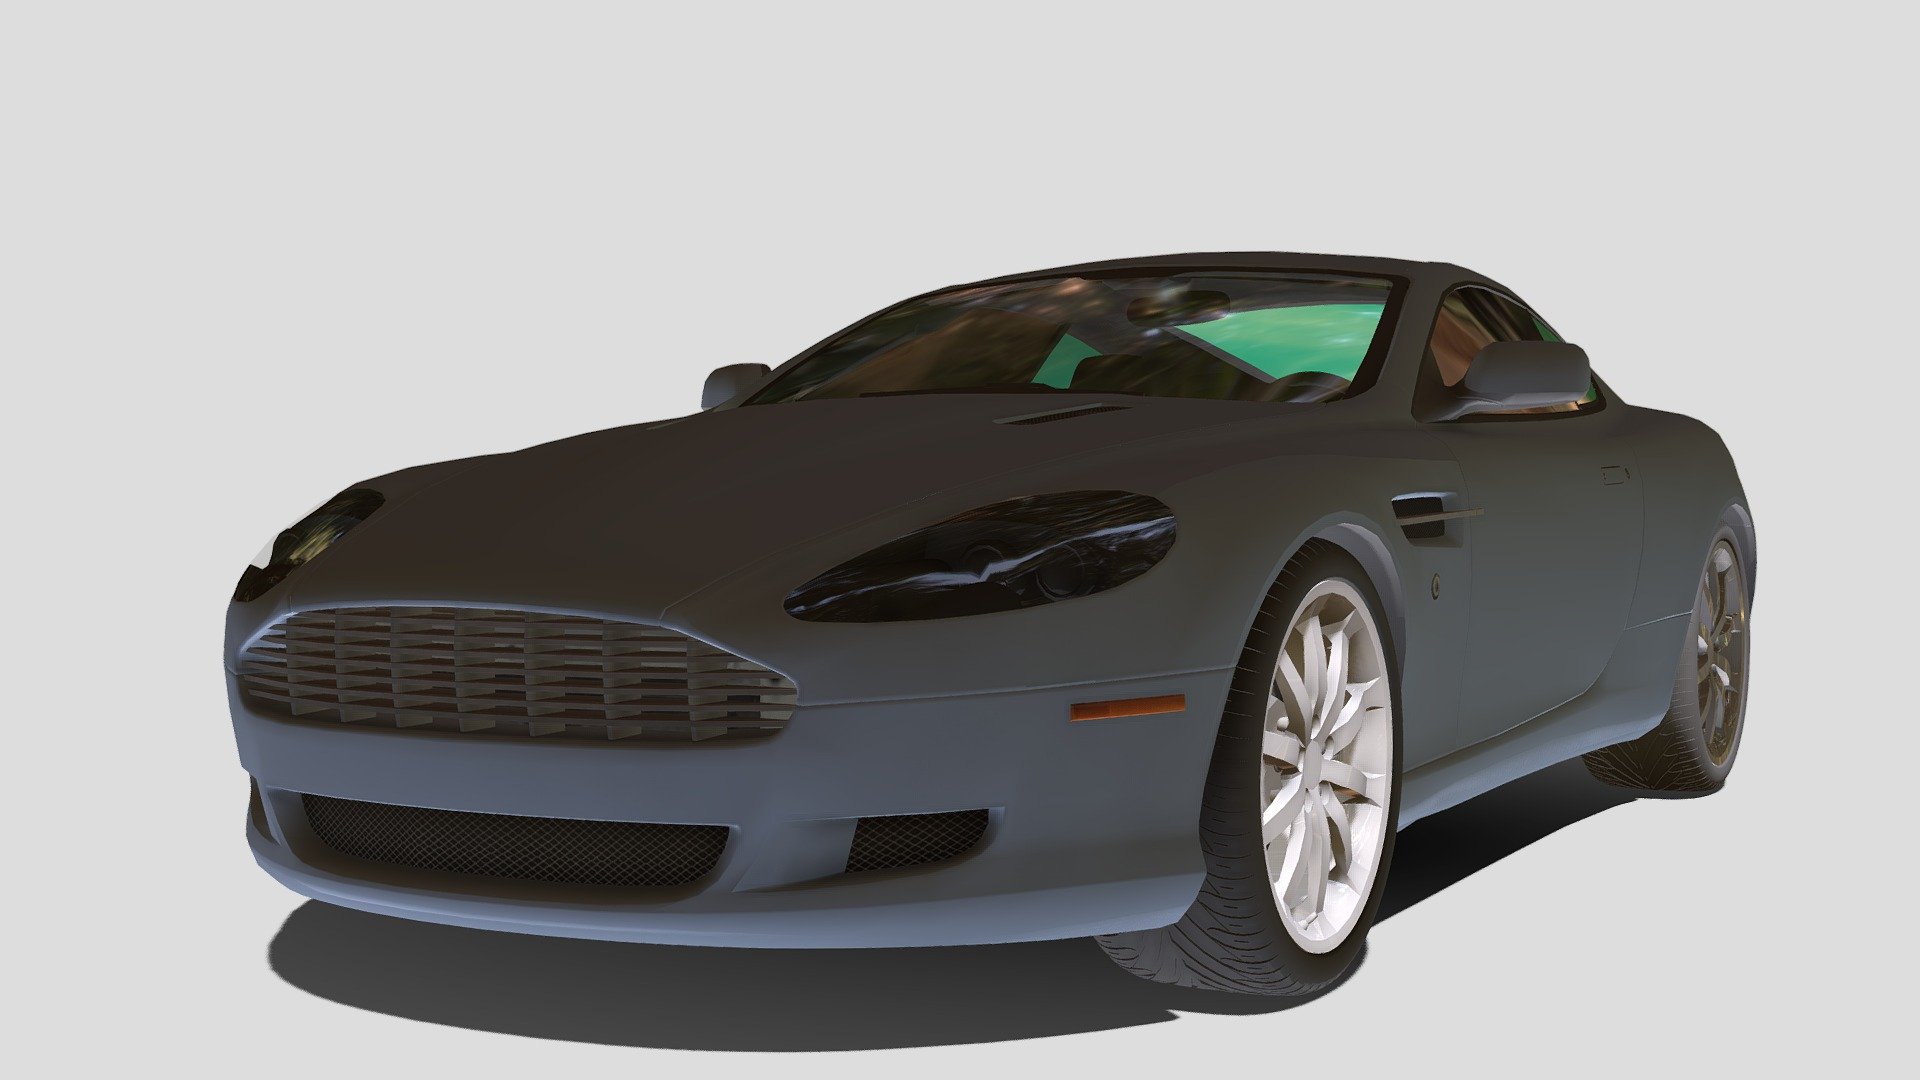 The value of a used 2005 Aston Martin DB9 ranges from $10,016 to $19,144, based on vehicle condition, mileage, and options.

Coupe
2005 Aston Martin DB9   Specs   Price
(base)  Specs: 5.9L, Premium Unleaded Petrol, 6 SPEED AUTO TOUCHTRONIC  Price: $89,320 - $102,630
(base)  Specs: 5.9L, Premium Unleaded Petrol, 6 SPEED MANUAL    Price: $87,230 - $100,210

How much is a DB9 Aston Martin worth?
Aston Martin DB9 (2004 - 2018) Used Prices
Most affordable version Used price range
V12 Volante 2d Auto £9,480 - £21,005 - Aston Martin DB9 - Download Free 3D model by BadKarma™ (@890244234) 3d model